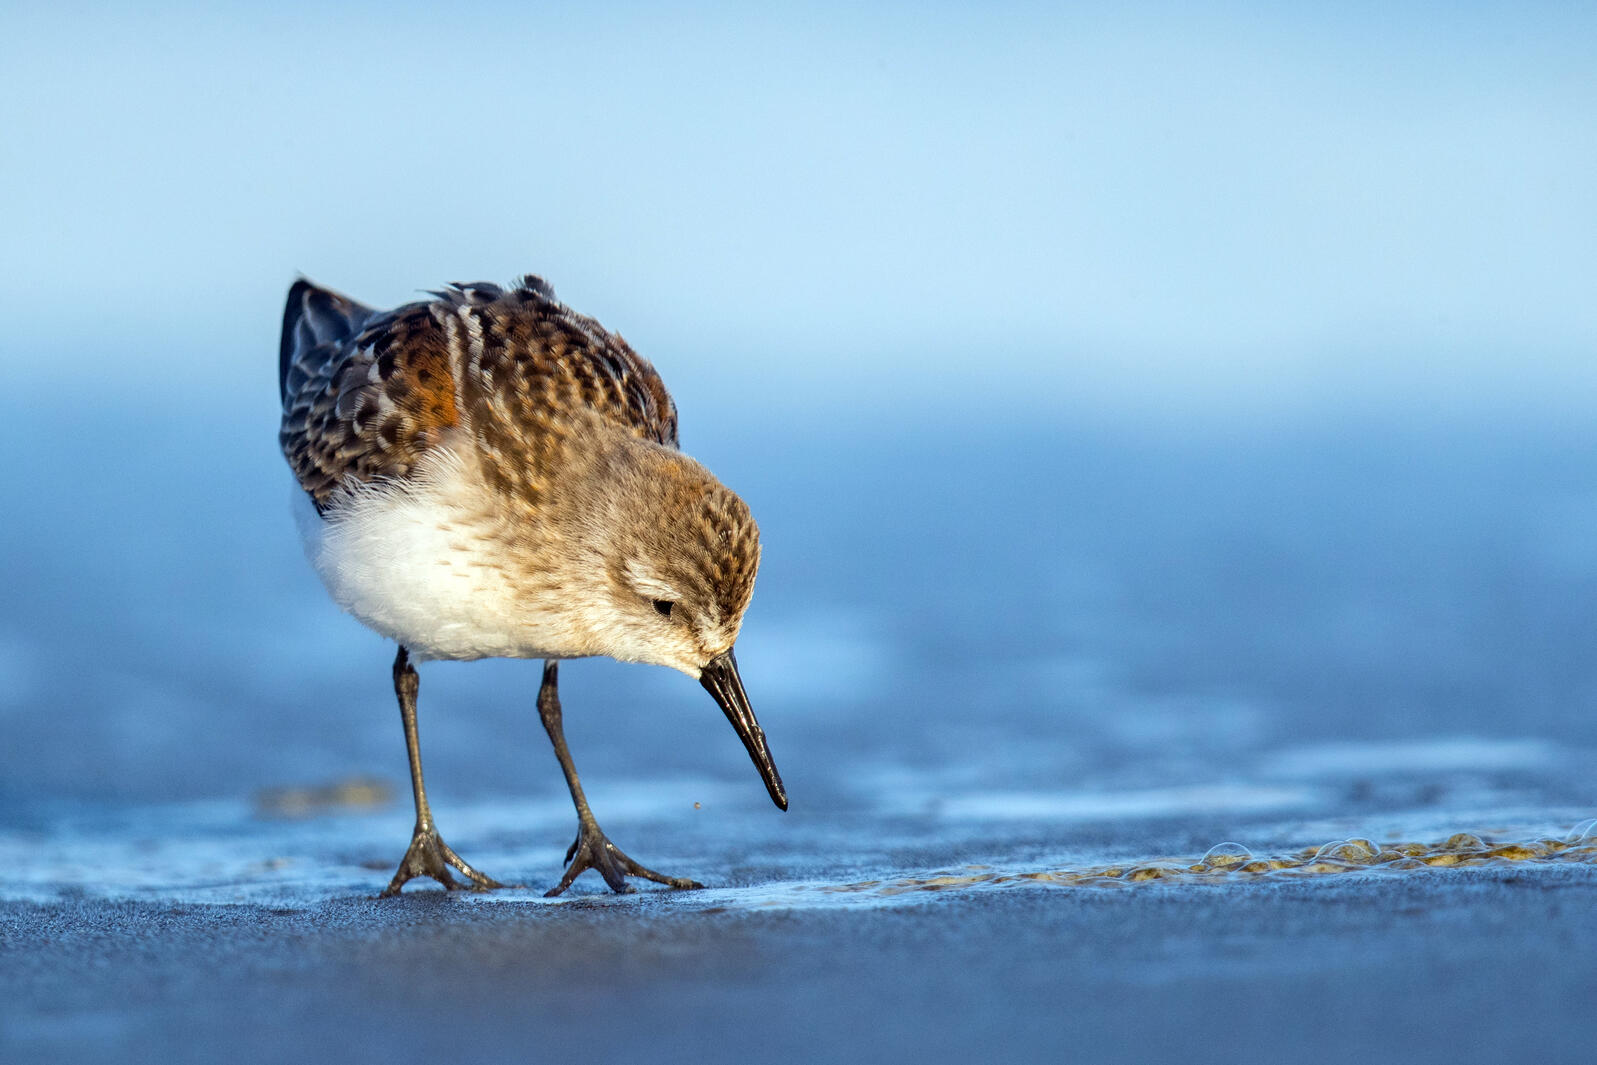 A Western Sandpiper looks for food along the shoreline